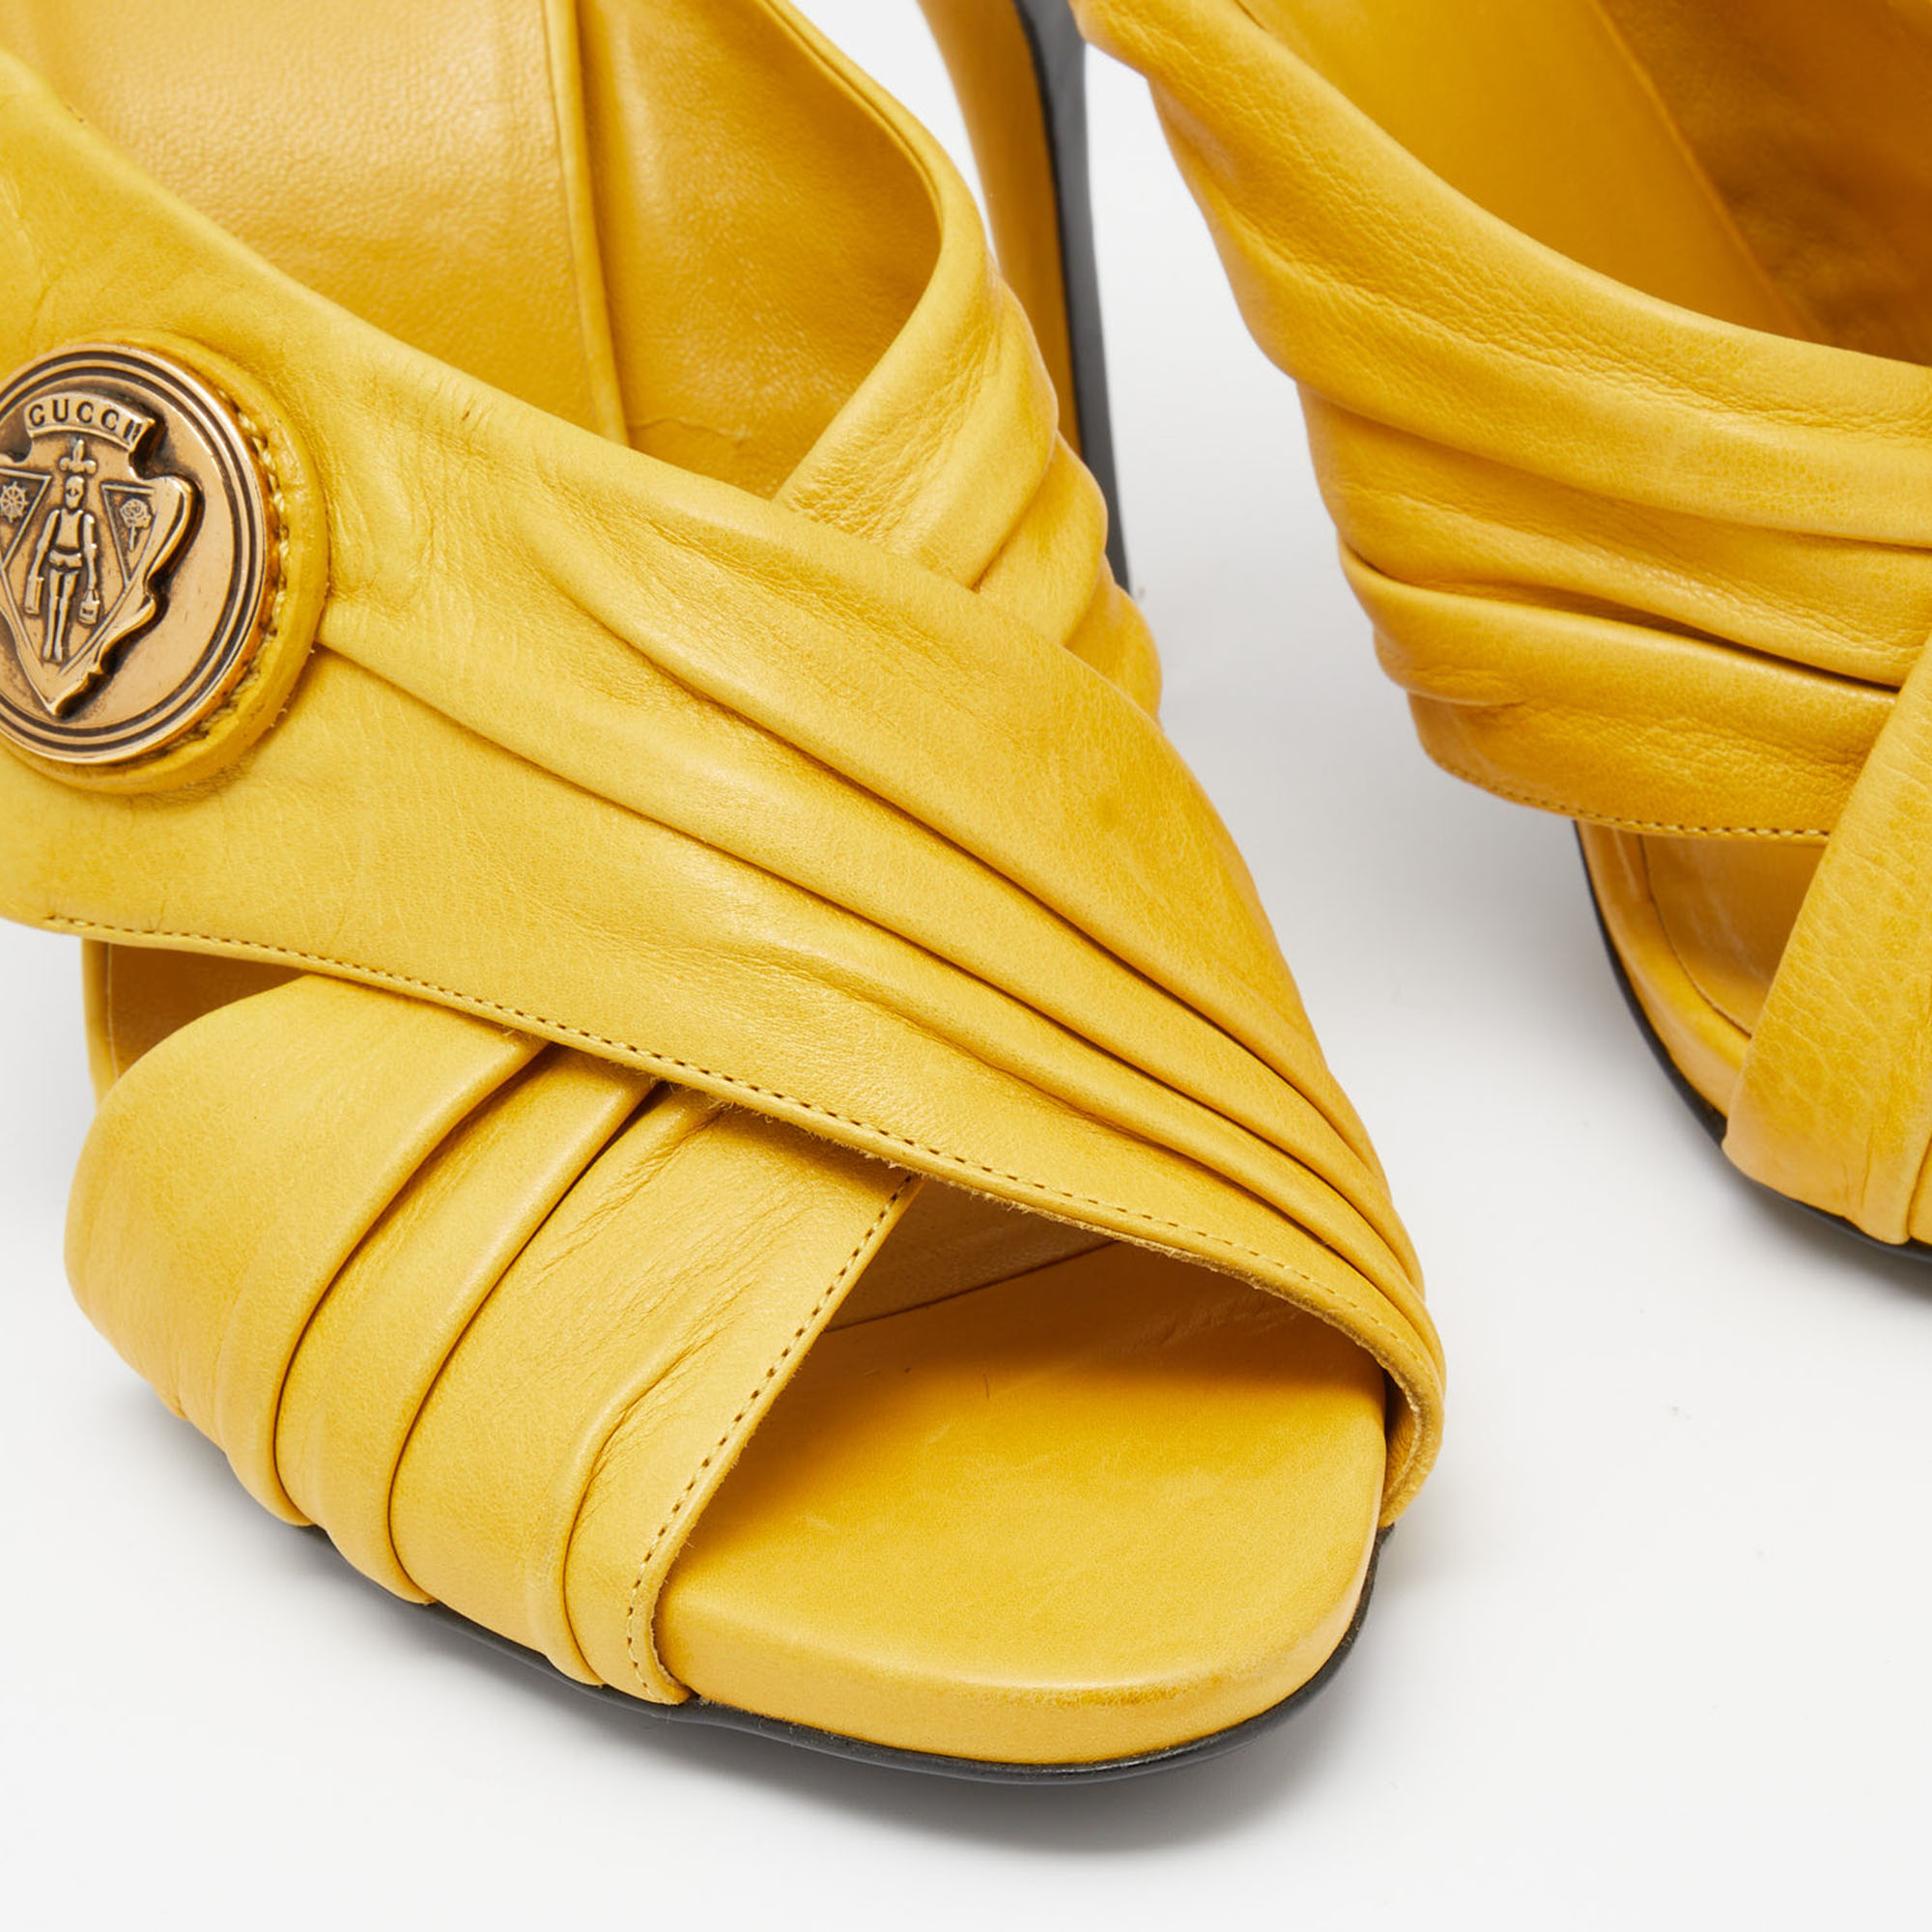 Gucci Yellow Leather Hysteria Cross Slide Sandals Size 37.5